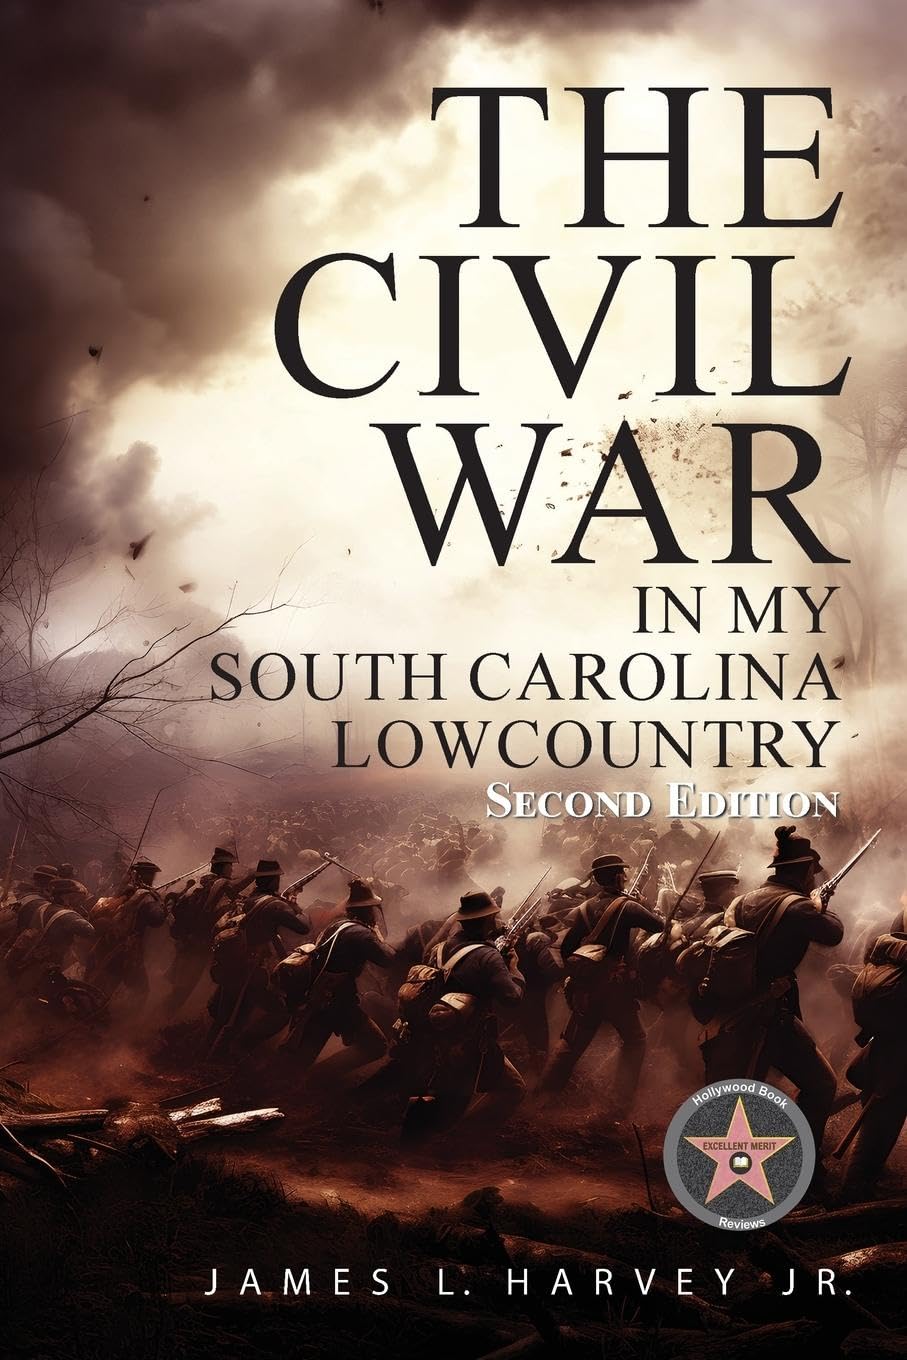 Saga of Survival: Exploring Family Legacy in 'The Civil War in My South Carolina Lowcountry' by James L. Harvey Jr. 